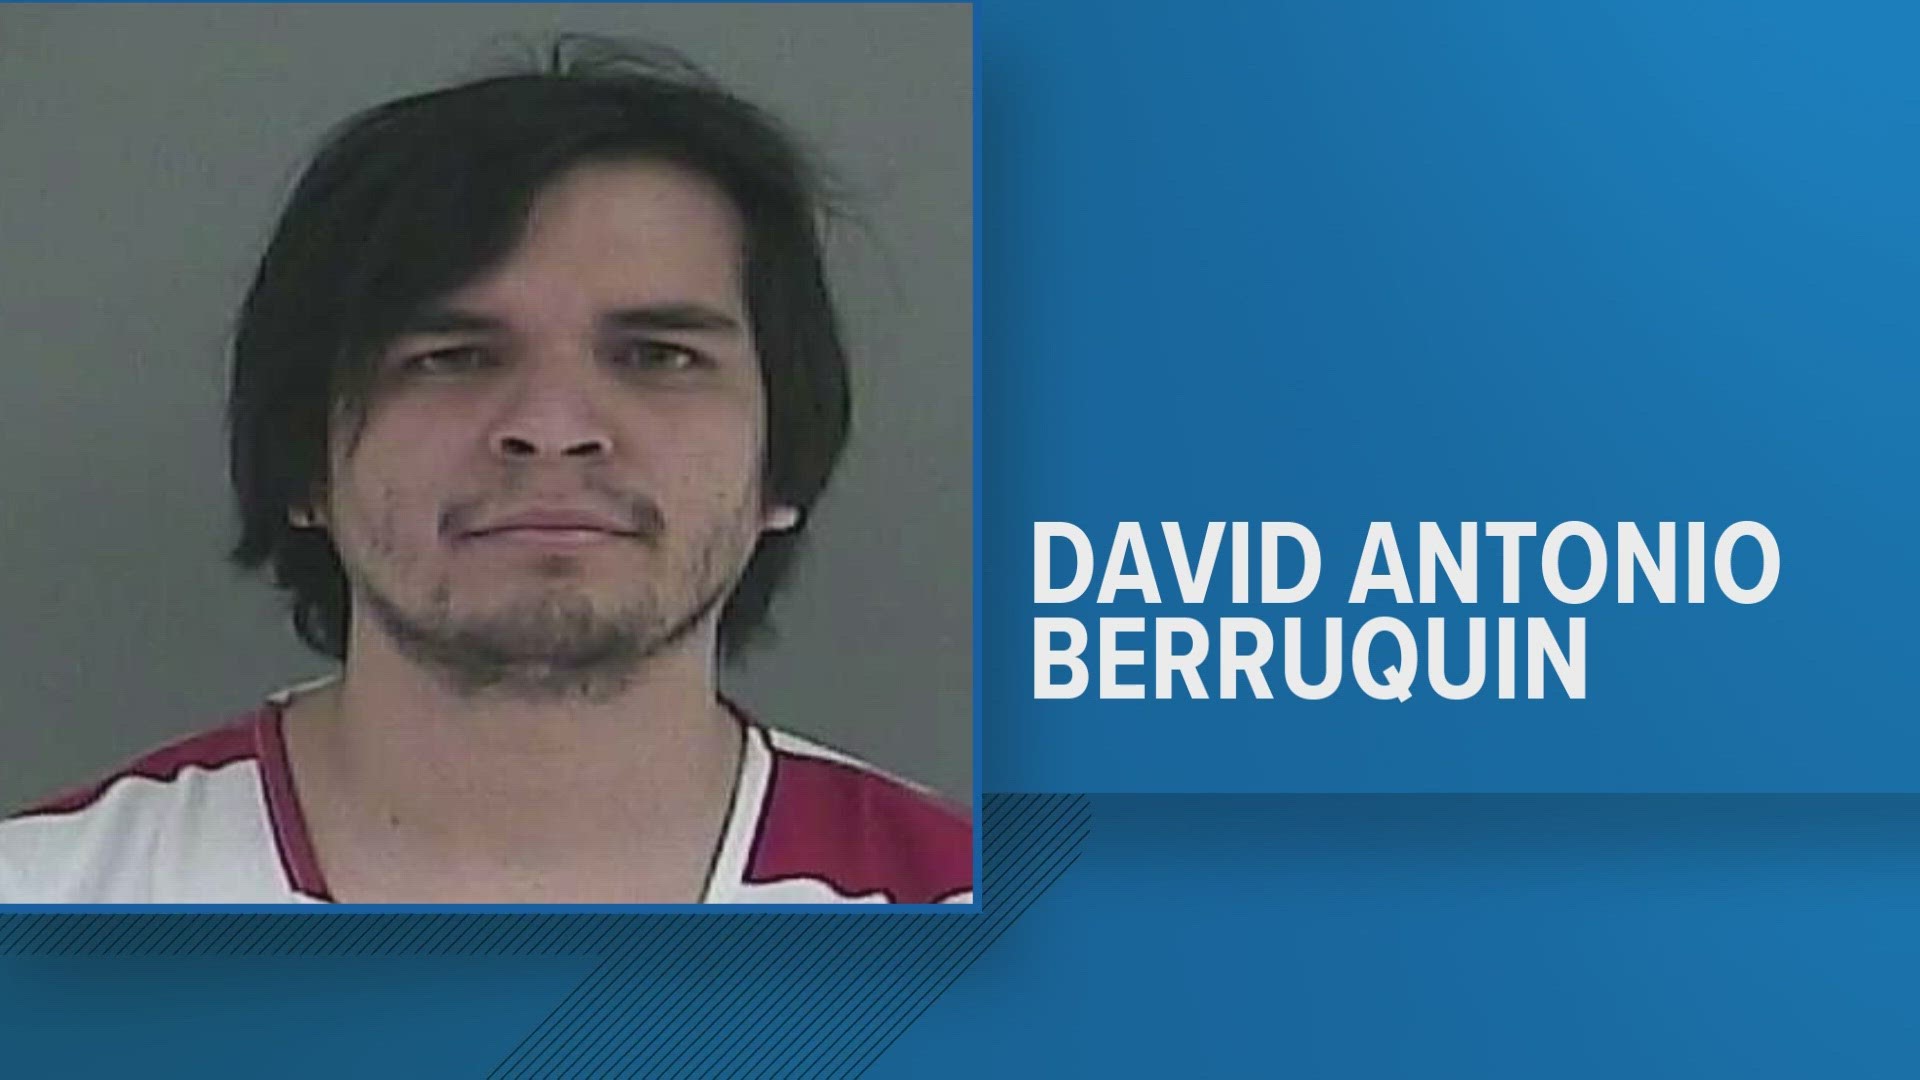 David Antonio Berruquin admitted that he'd taken his phone into the jail while working and allowed inmates to access his phone on multiple occasions.